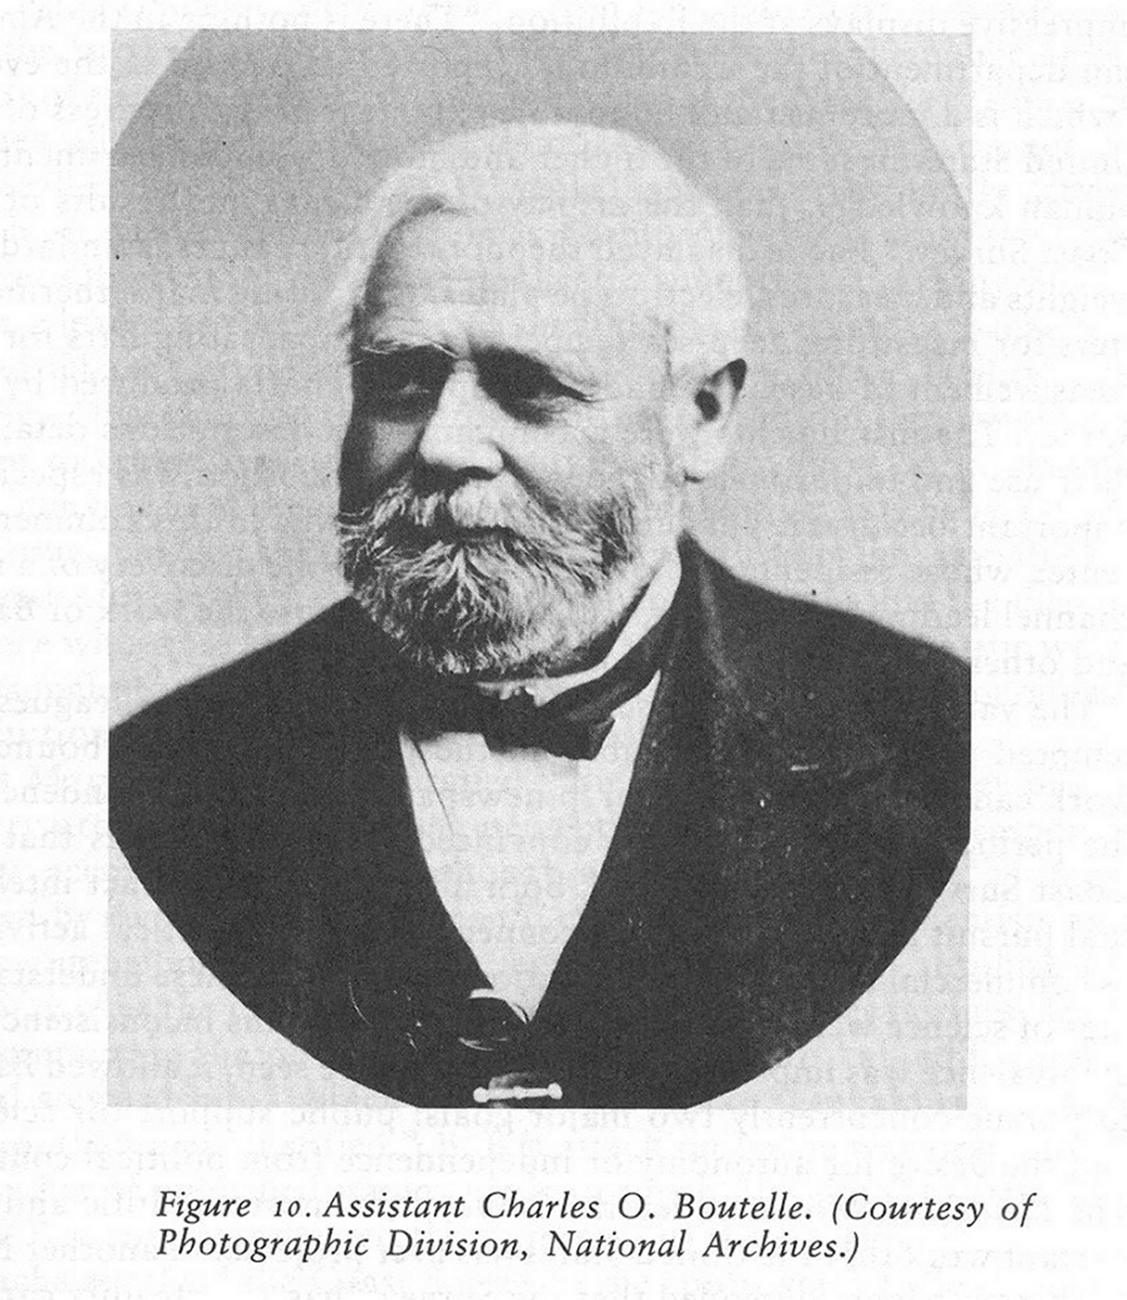 Assistant Charles O